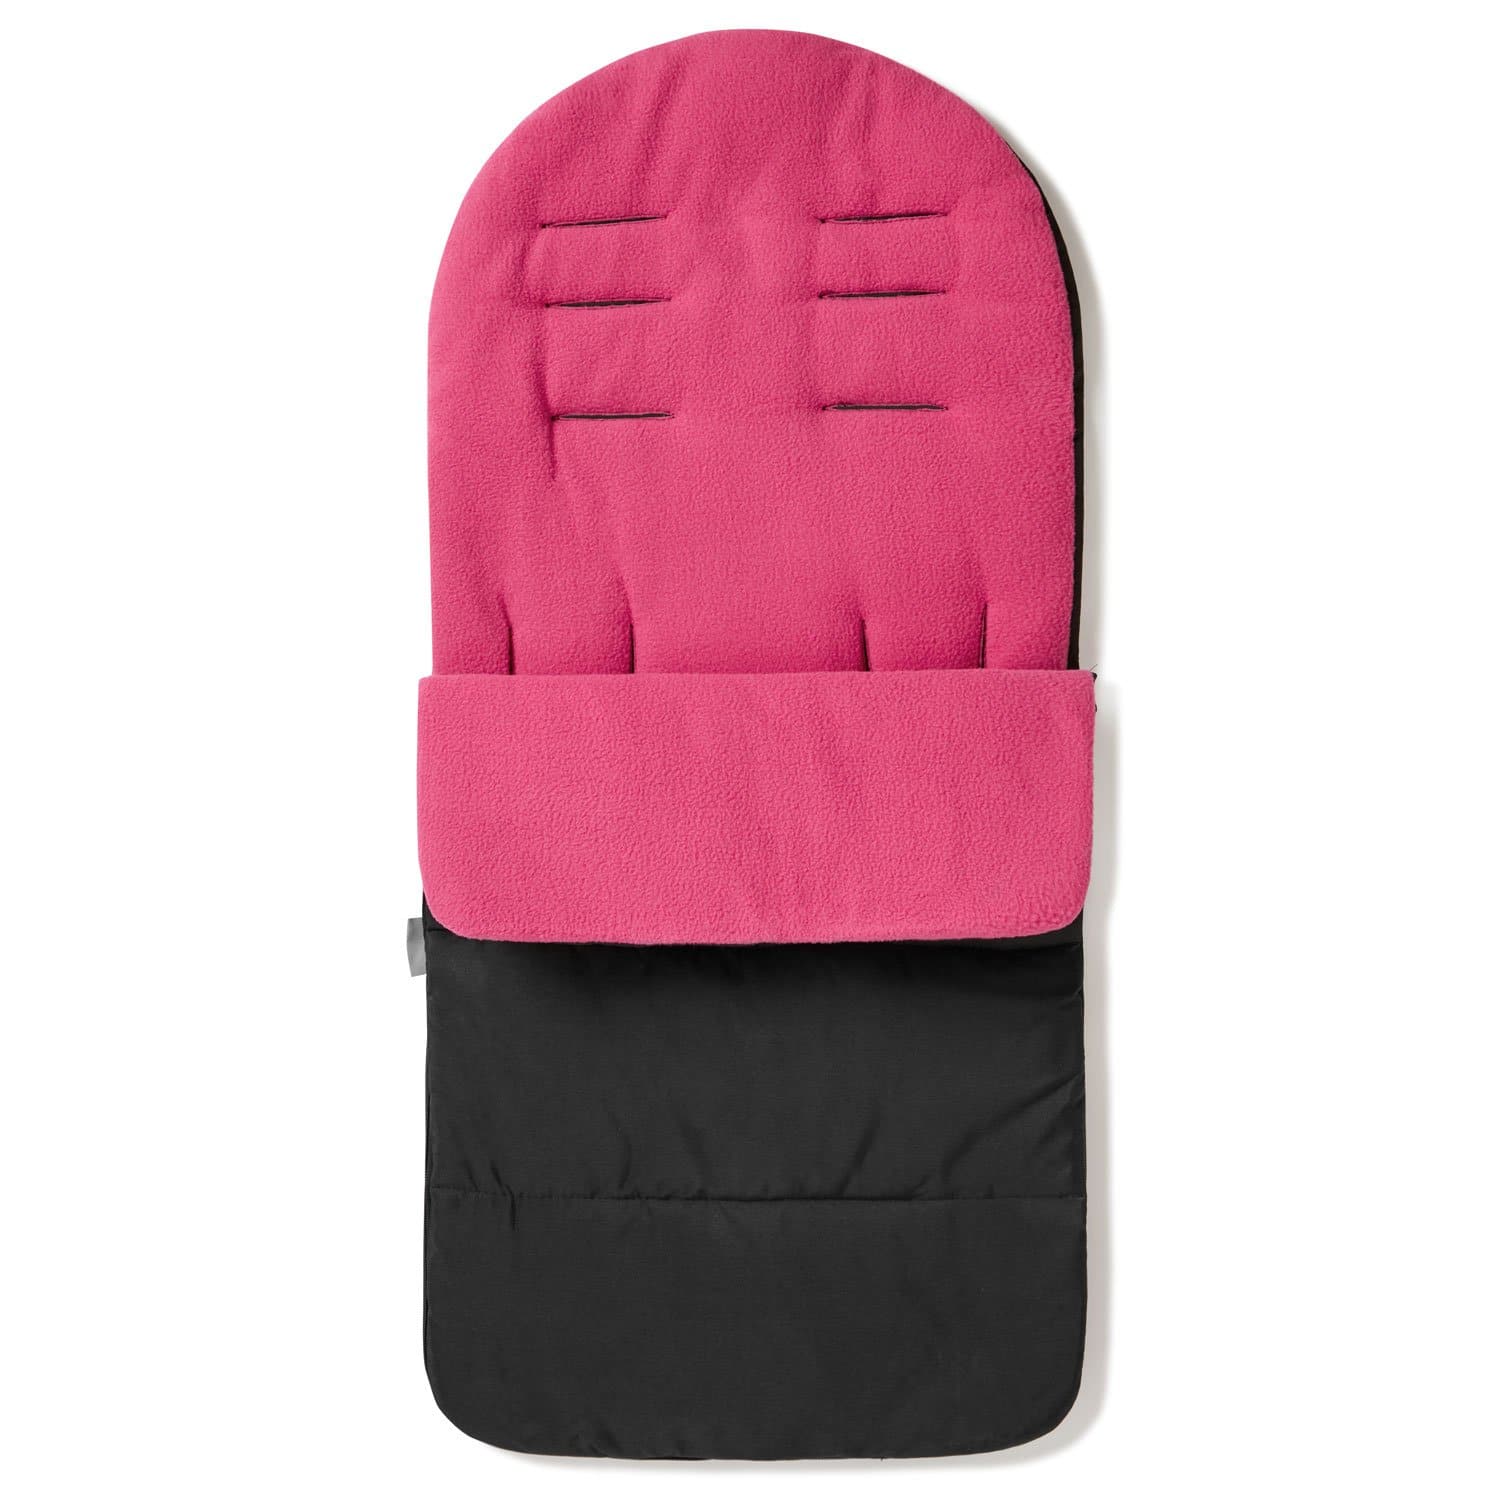 Premium Footmuff / Cosy Toes Compatible with Looping - Pink Rose / Fits All Models | For Your Little One